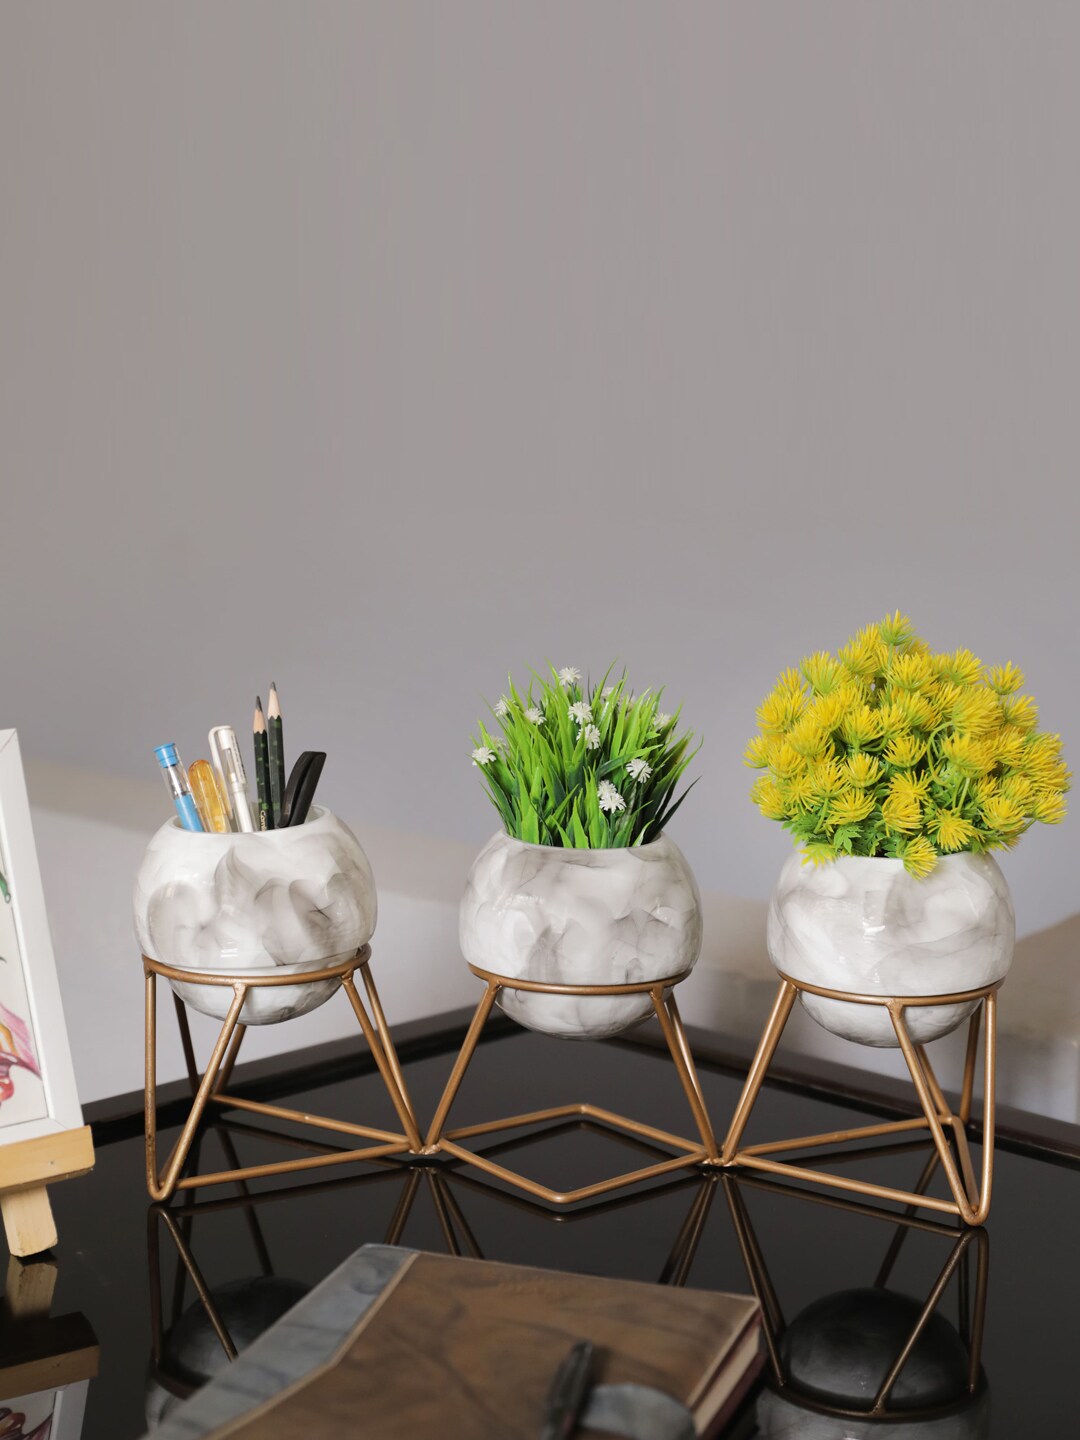 AWAAS DECOR Set of 3 White & Gold-Toned Textured Planters with Stand Price in India